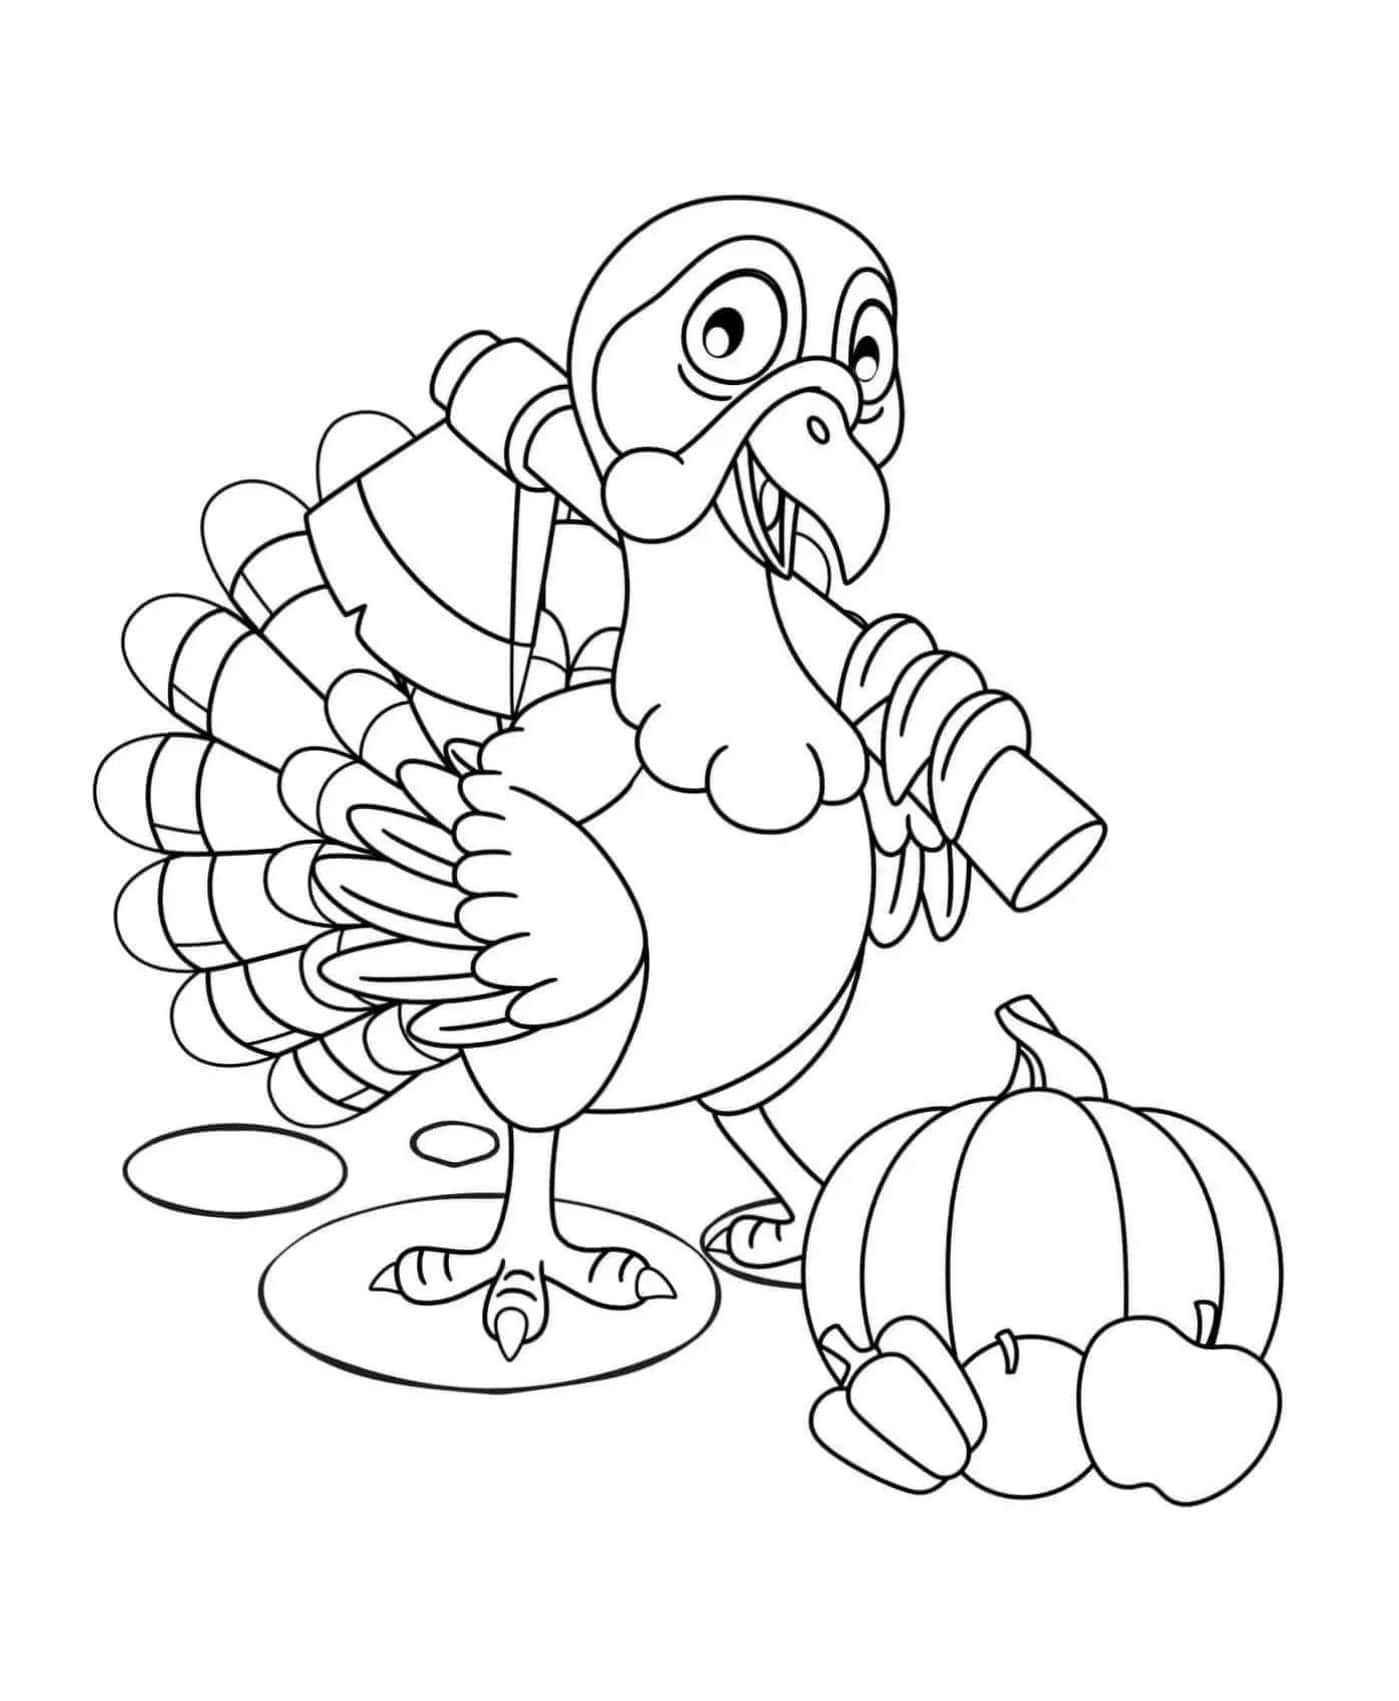 Celebrate Thanksgiving with a Fun Turkey Coloring!